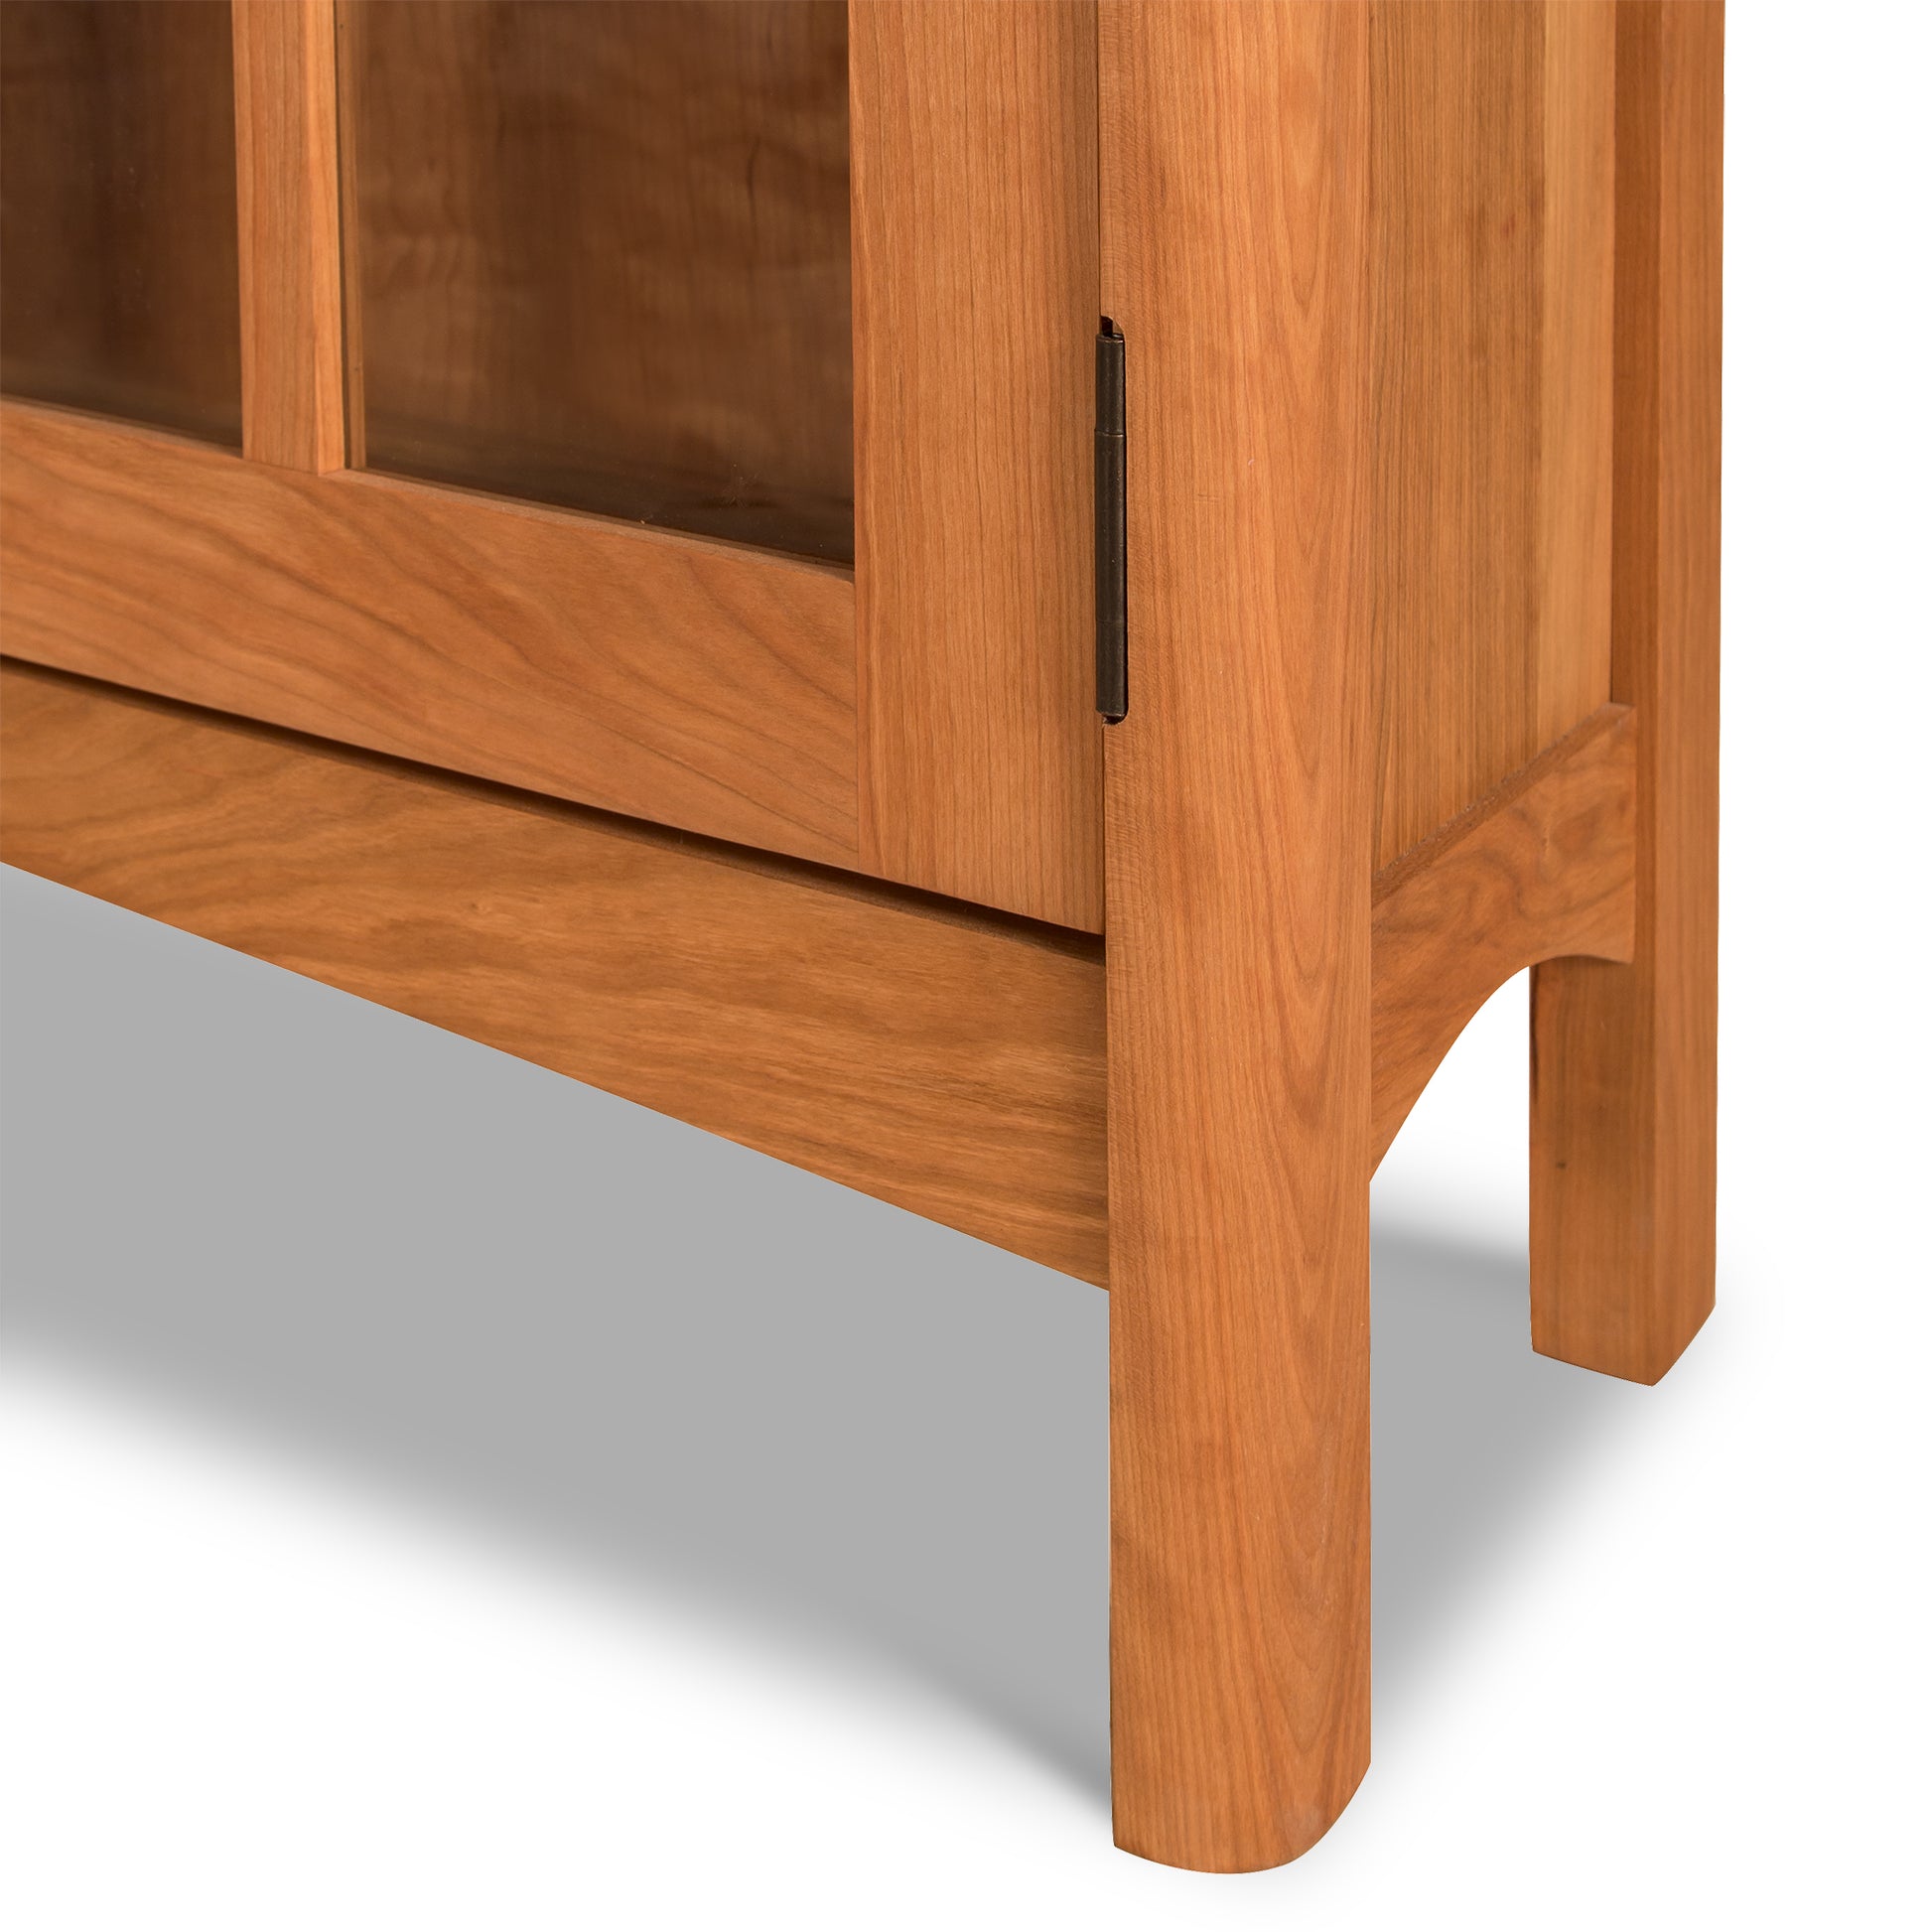 A close-up view of the Vermont Furniture Designs Heartwood Shaker 2-Glass Door Bookcase showcasing the joint details and wood grain texture against a white background.